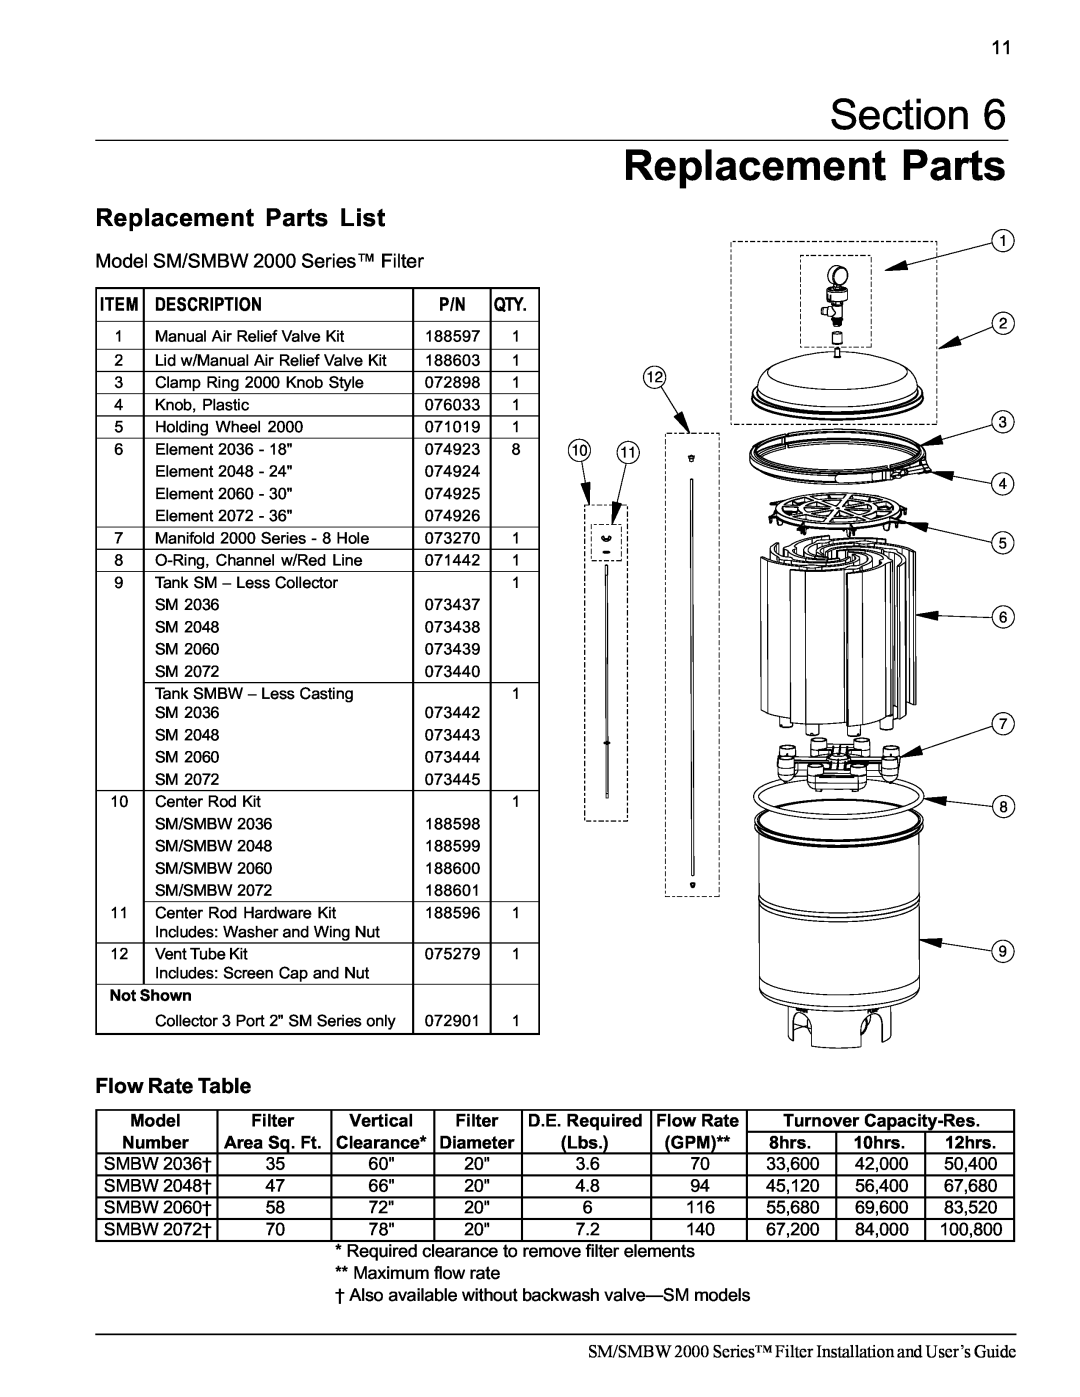 Pentair SM/SMBW 2000 important safety instructions Section Replacement Parts, Replacement Parts List 